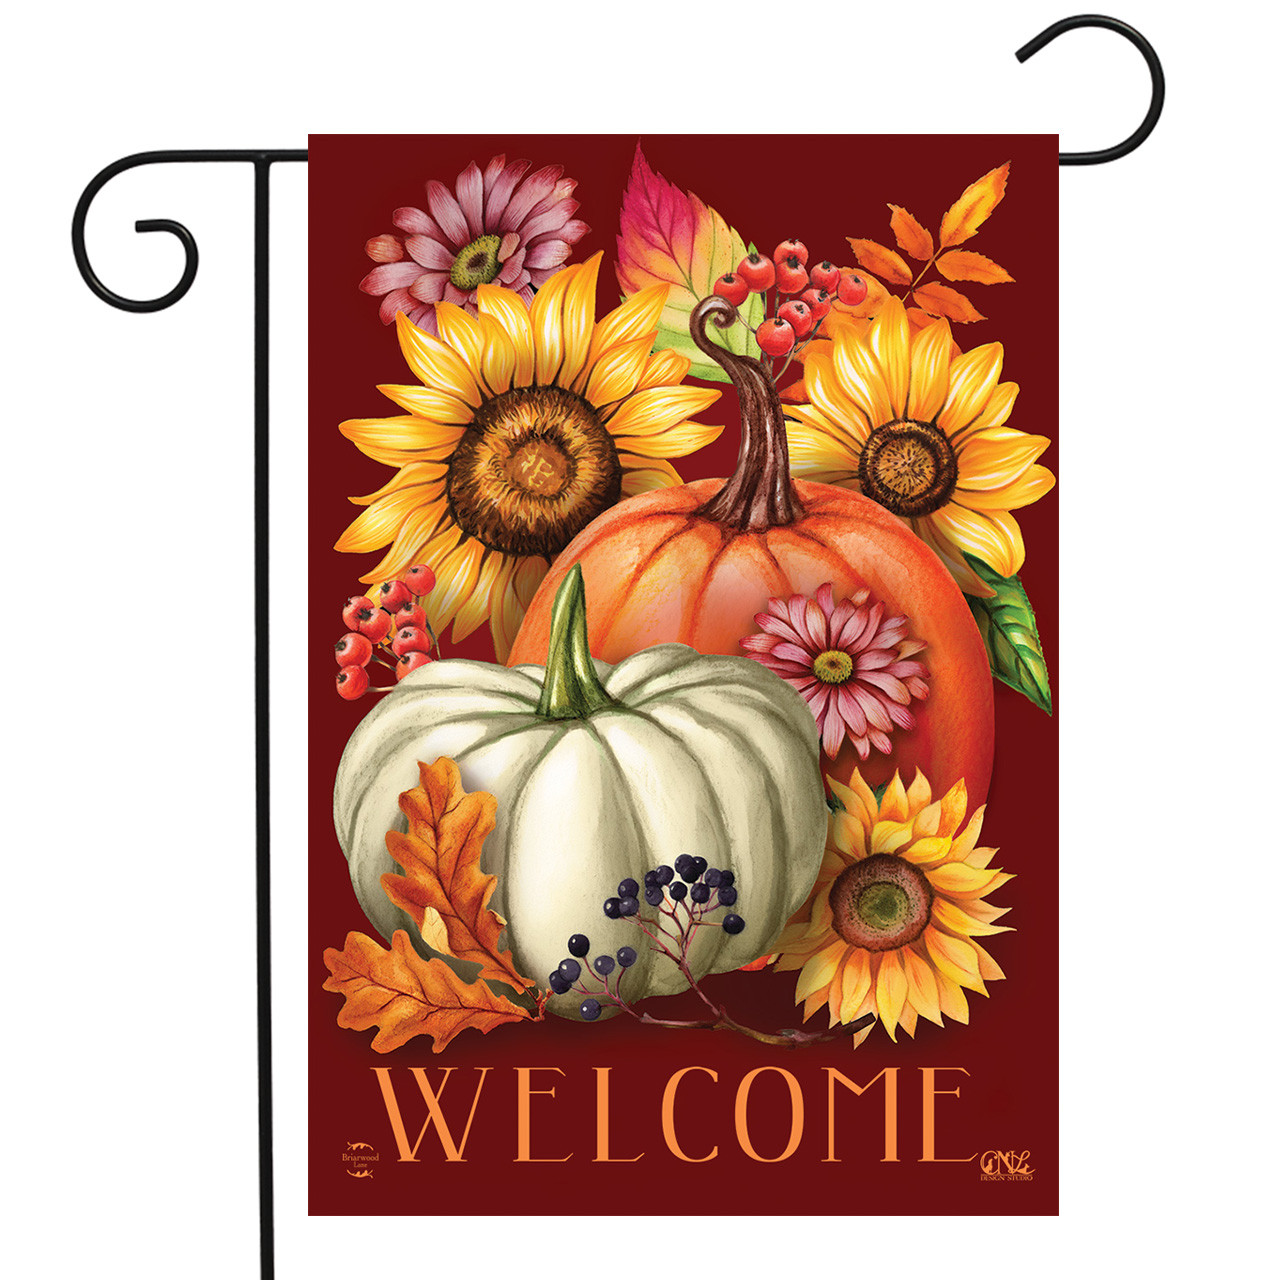 Garden Flags for Sale - Discount Decorative Flags